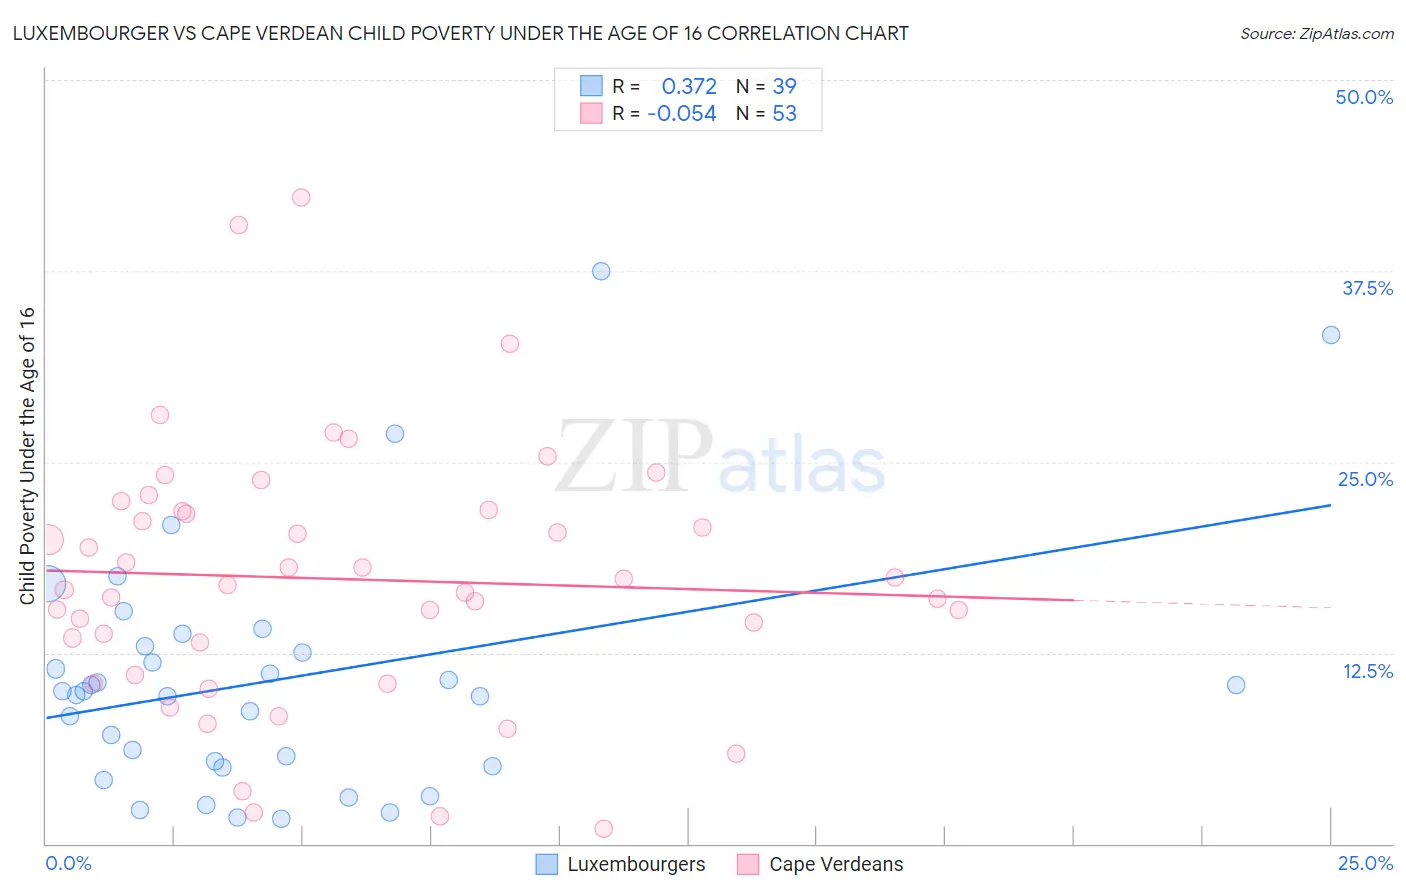 Luxembourger vs Cape Verdean Child Poverty Under the Age of 16